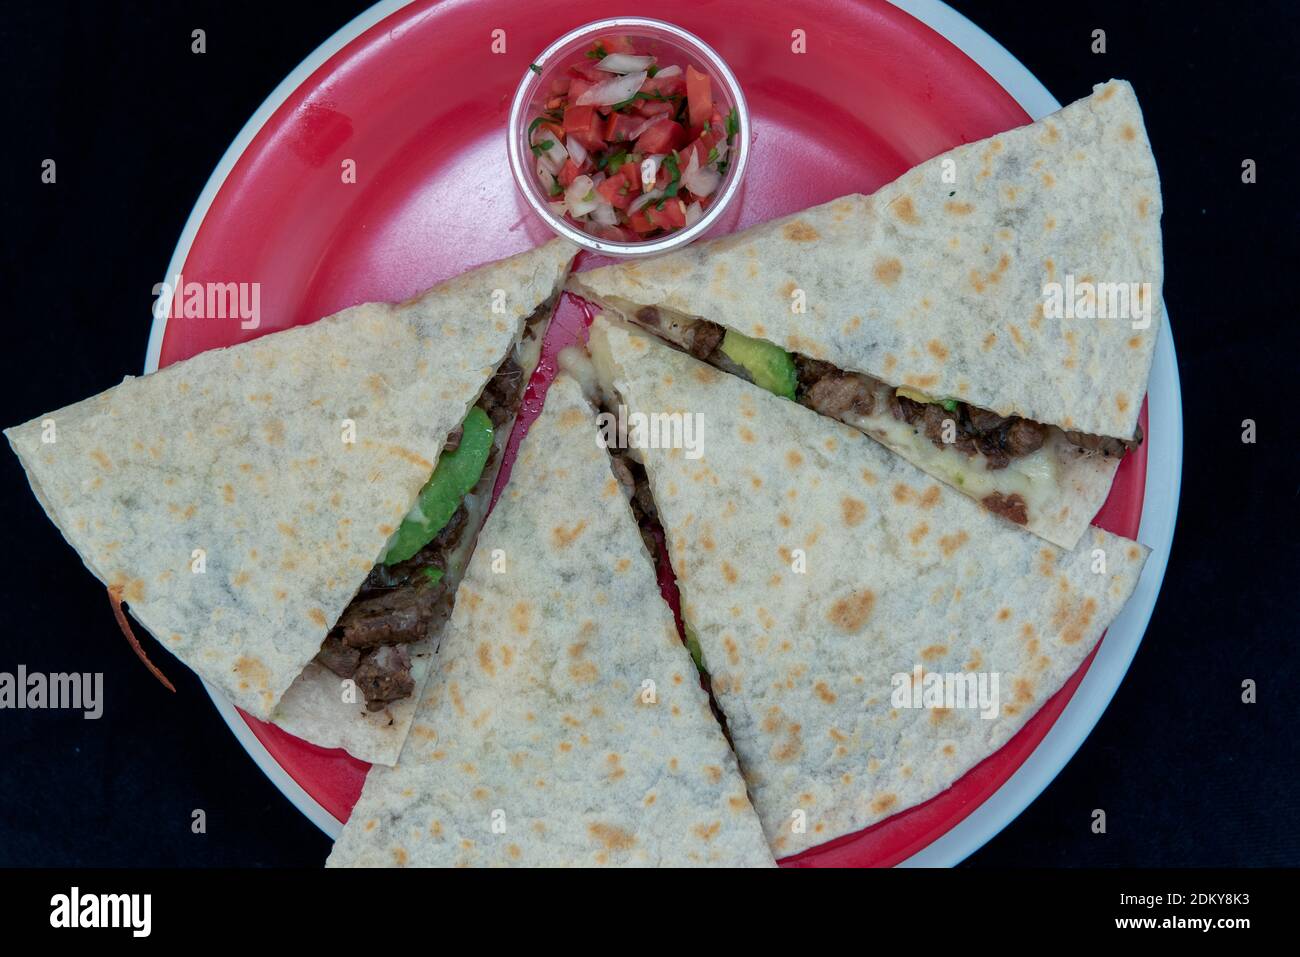 Overhead view of steak Asada quesadilla loaded with fresh meat, melted cheese and cut in wedges and presented on a red plate. Stock Photo